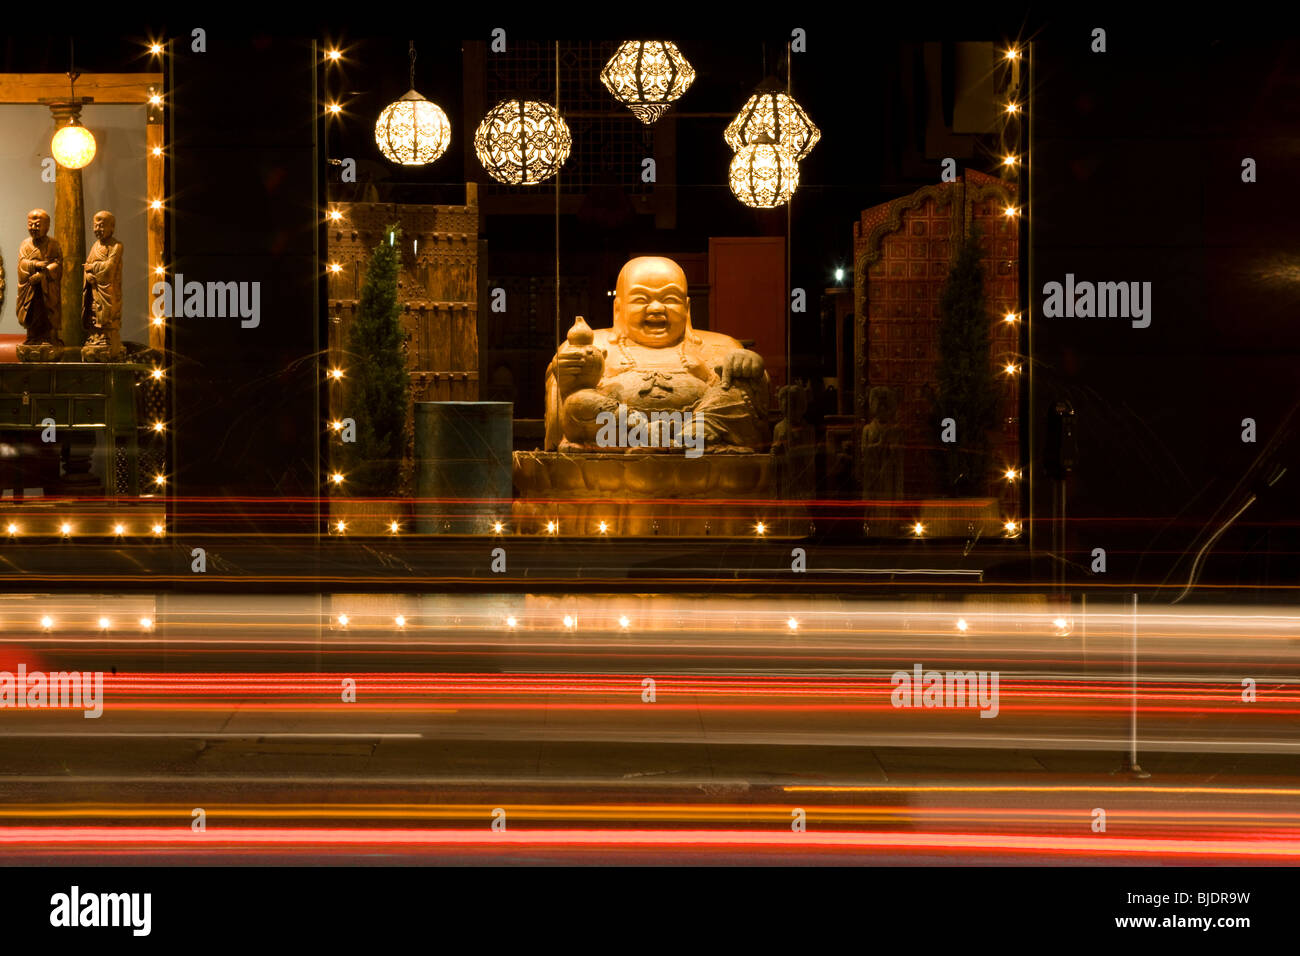 A budha sculpture in a shop window, Los Angeles County, California, United States of America Stock Photo